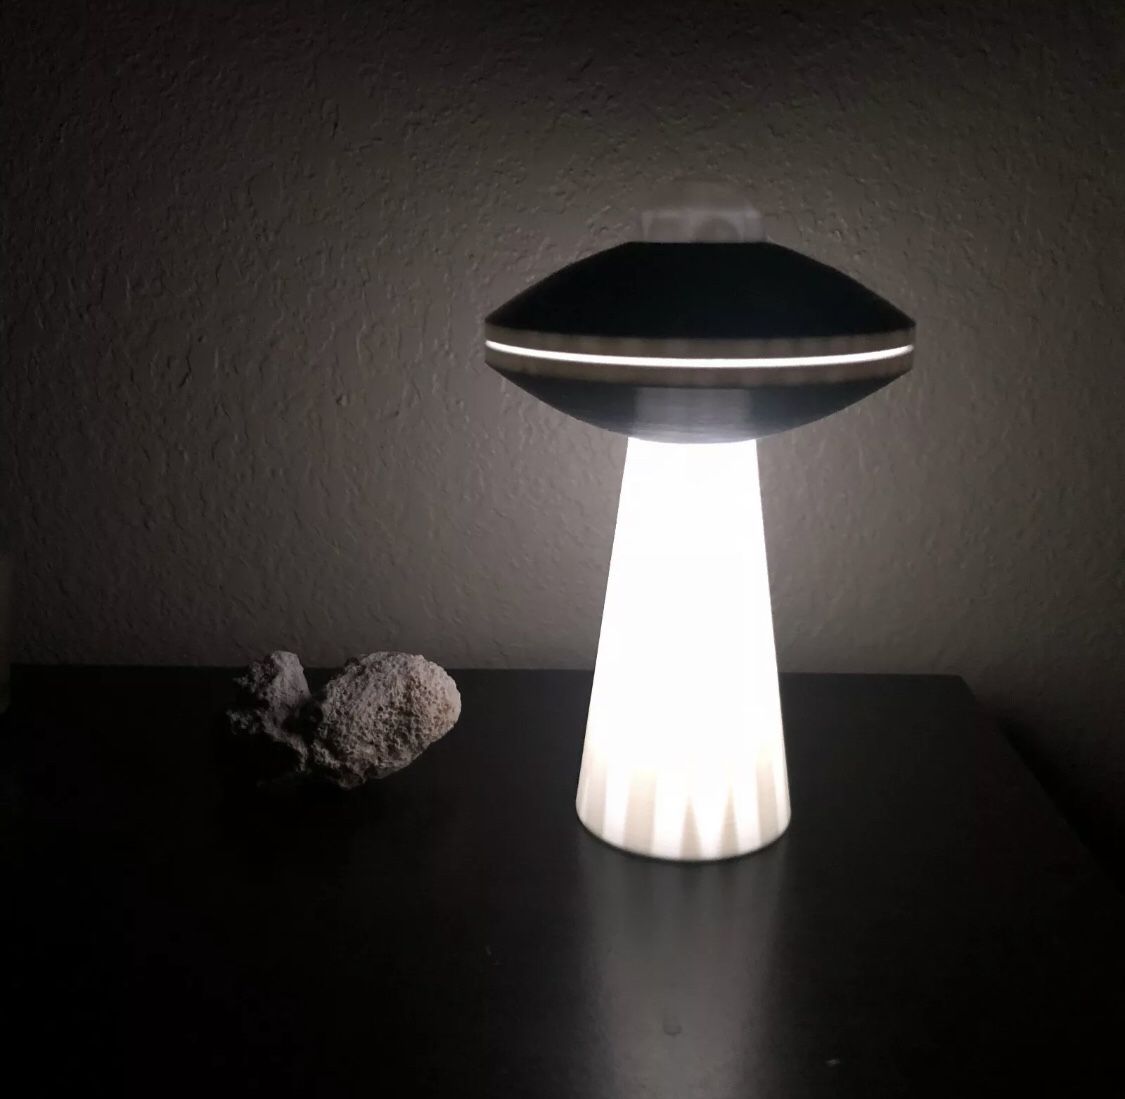 3D Printed UFO with Tractor Beam, UFO SciFi Lamp with LED, Alien Saucer with RGB LED